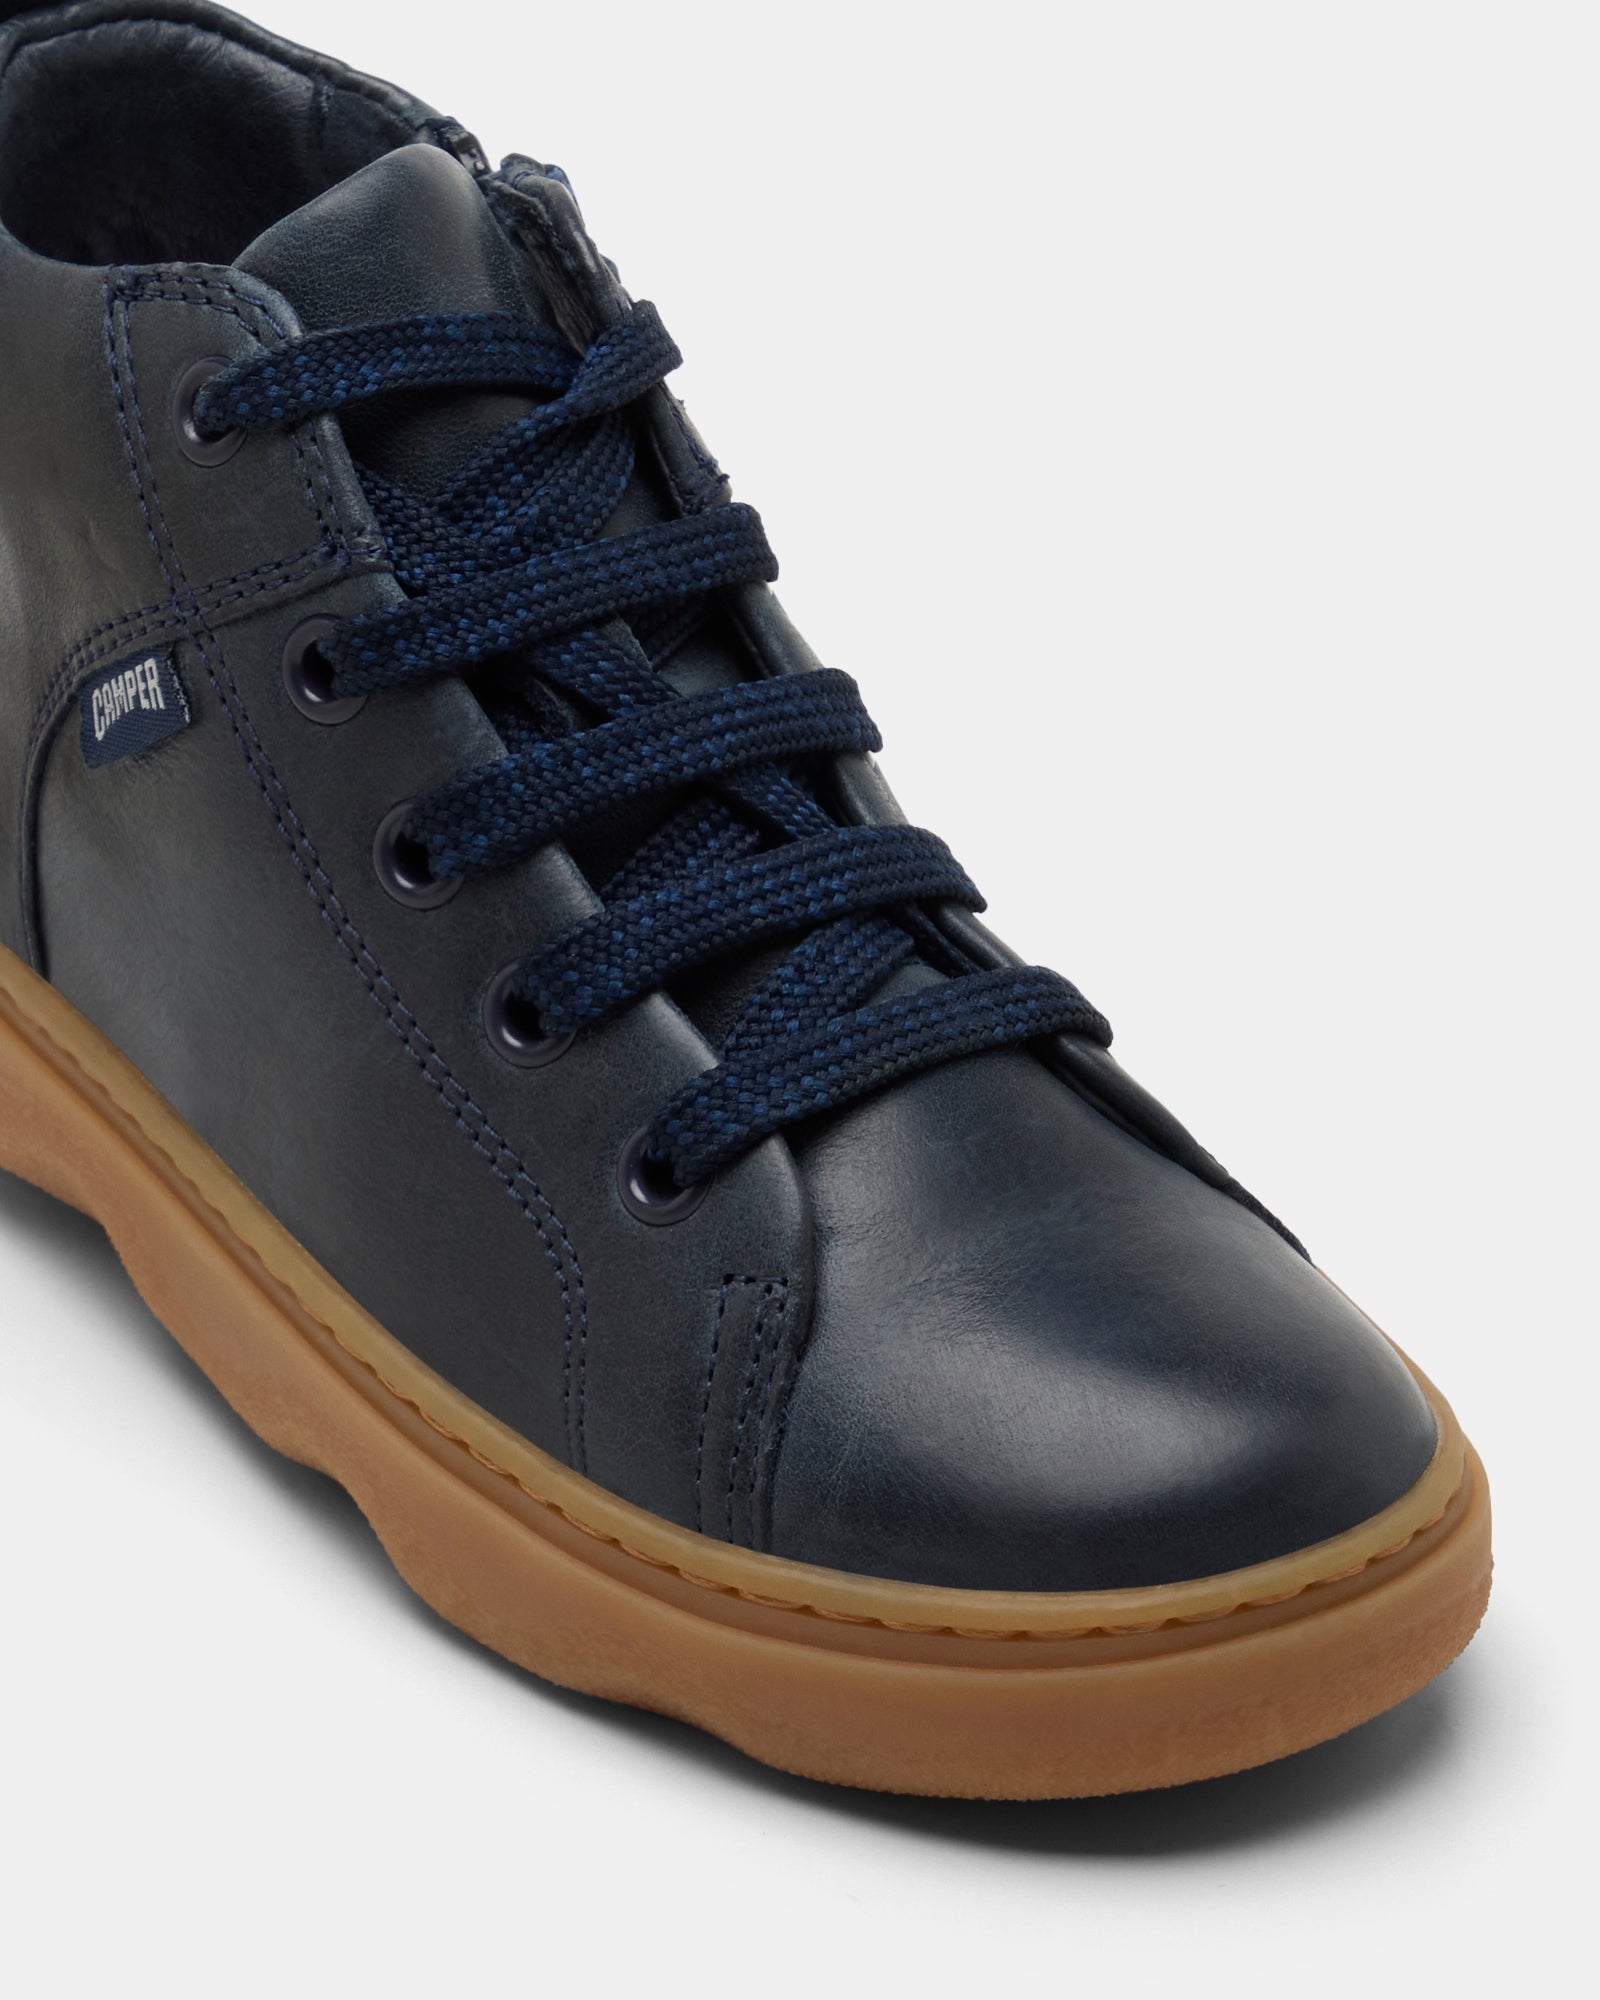 Kido Boots Youth Navy